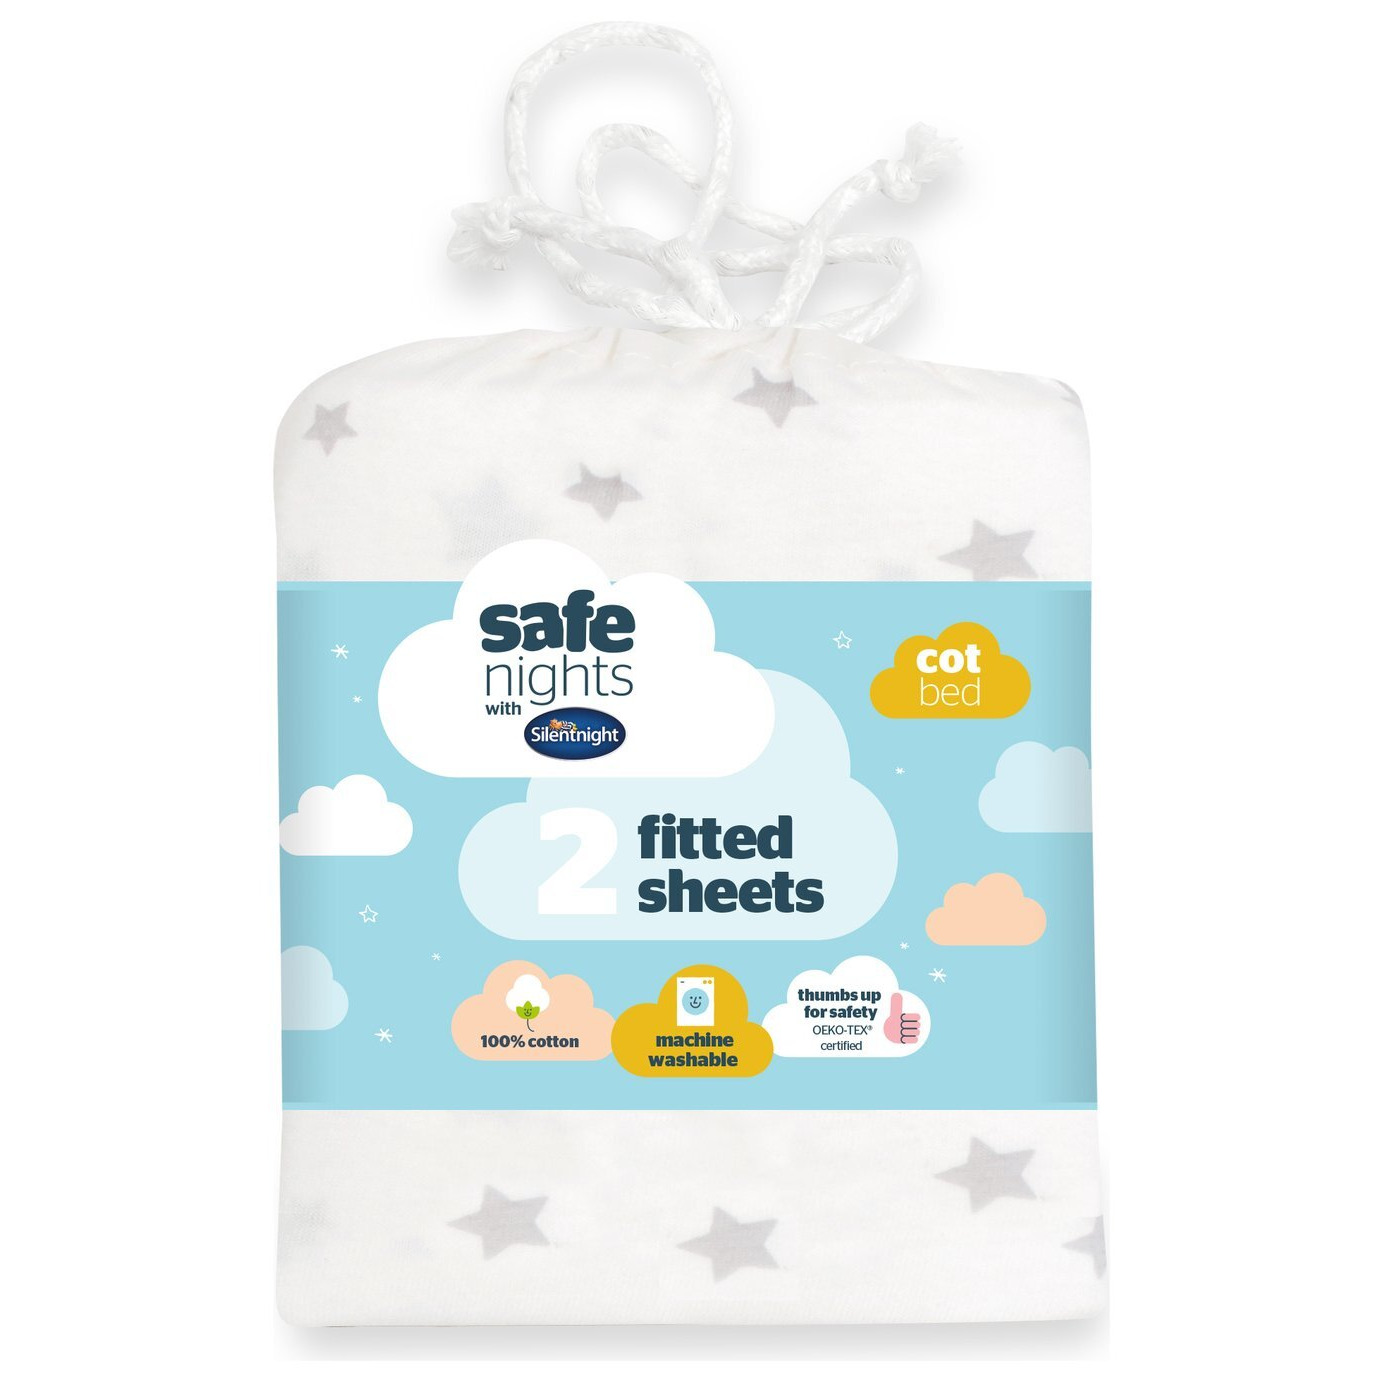 Silentnight Safe Nights Nursery Grey Fitted Sheets - Cot bed - image 1